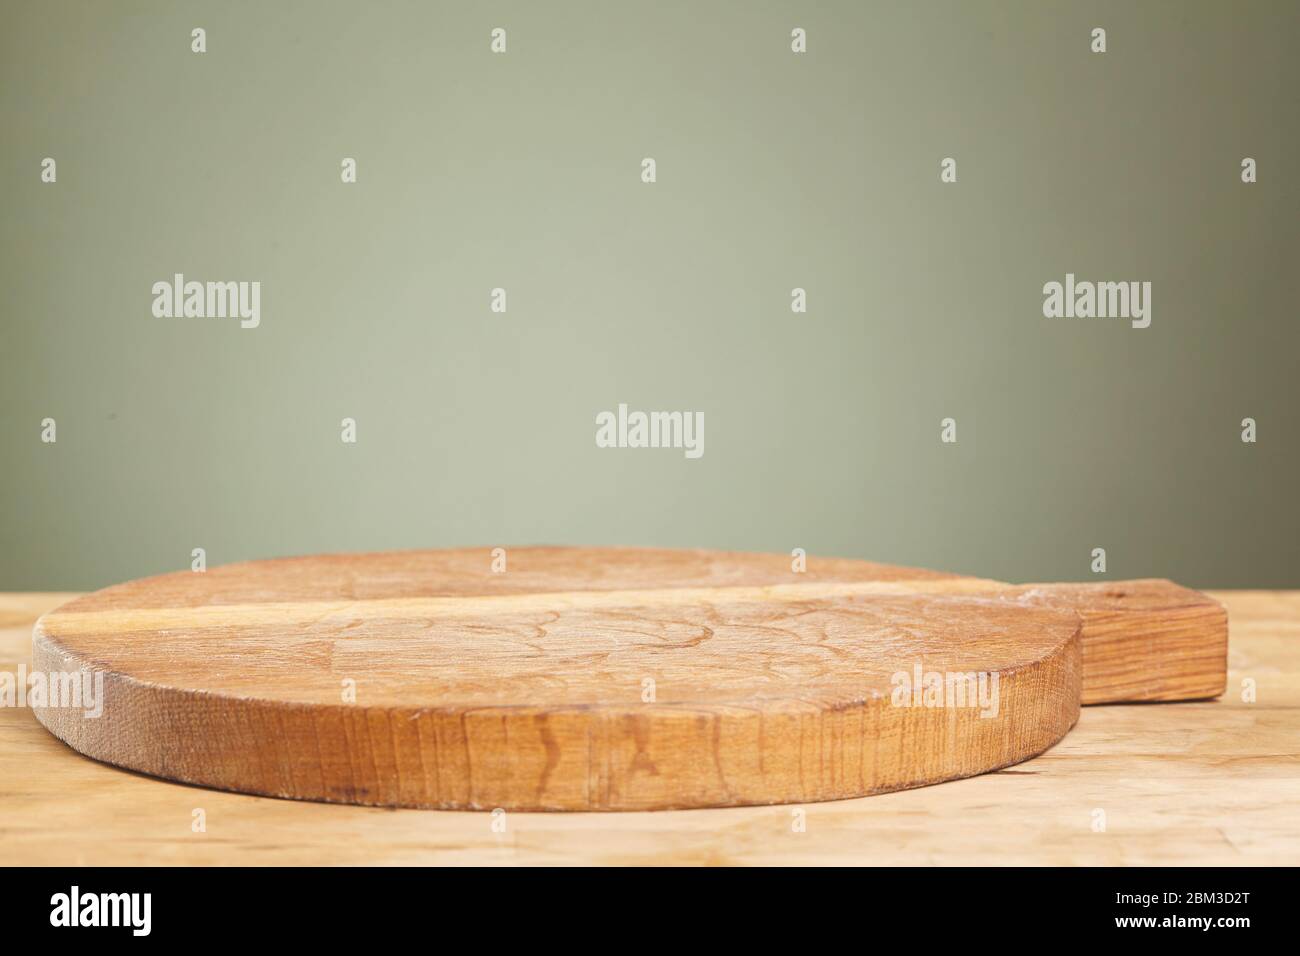 Empty cutting board on a wooden table close up Stock Photo